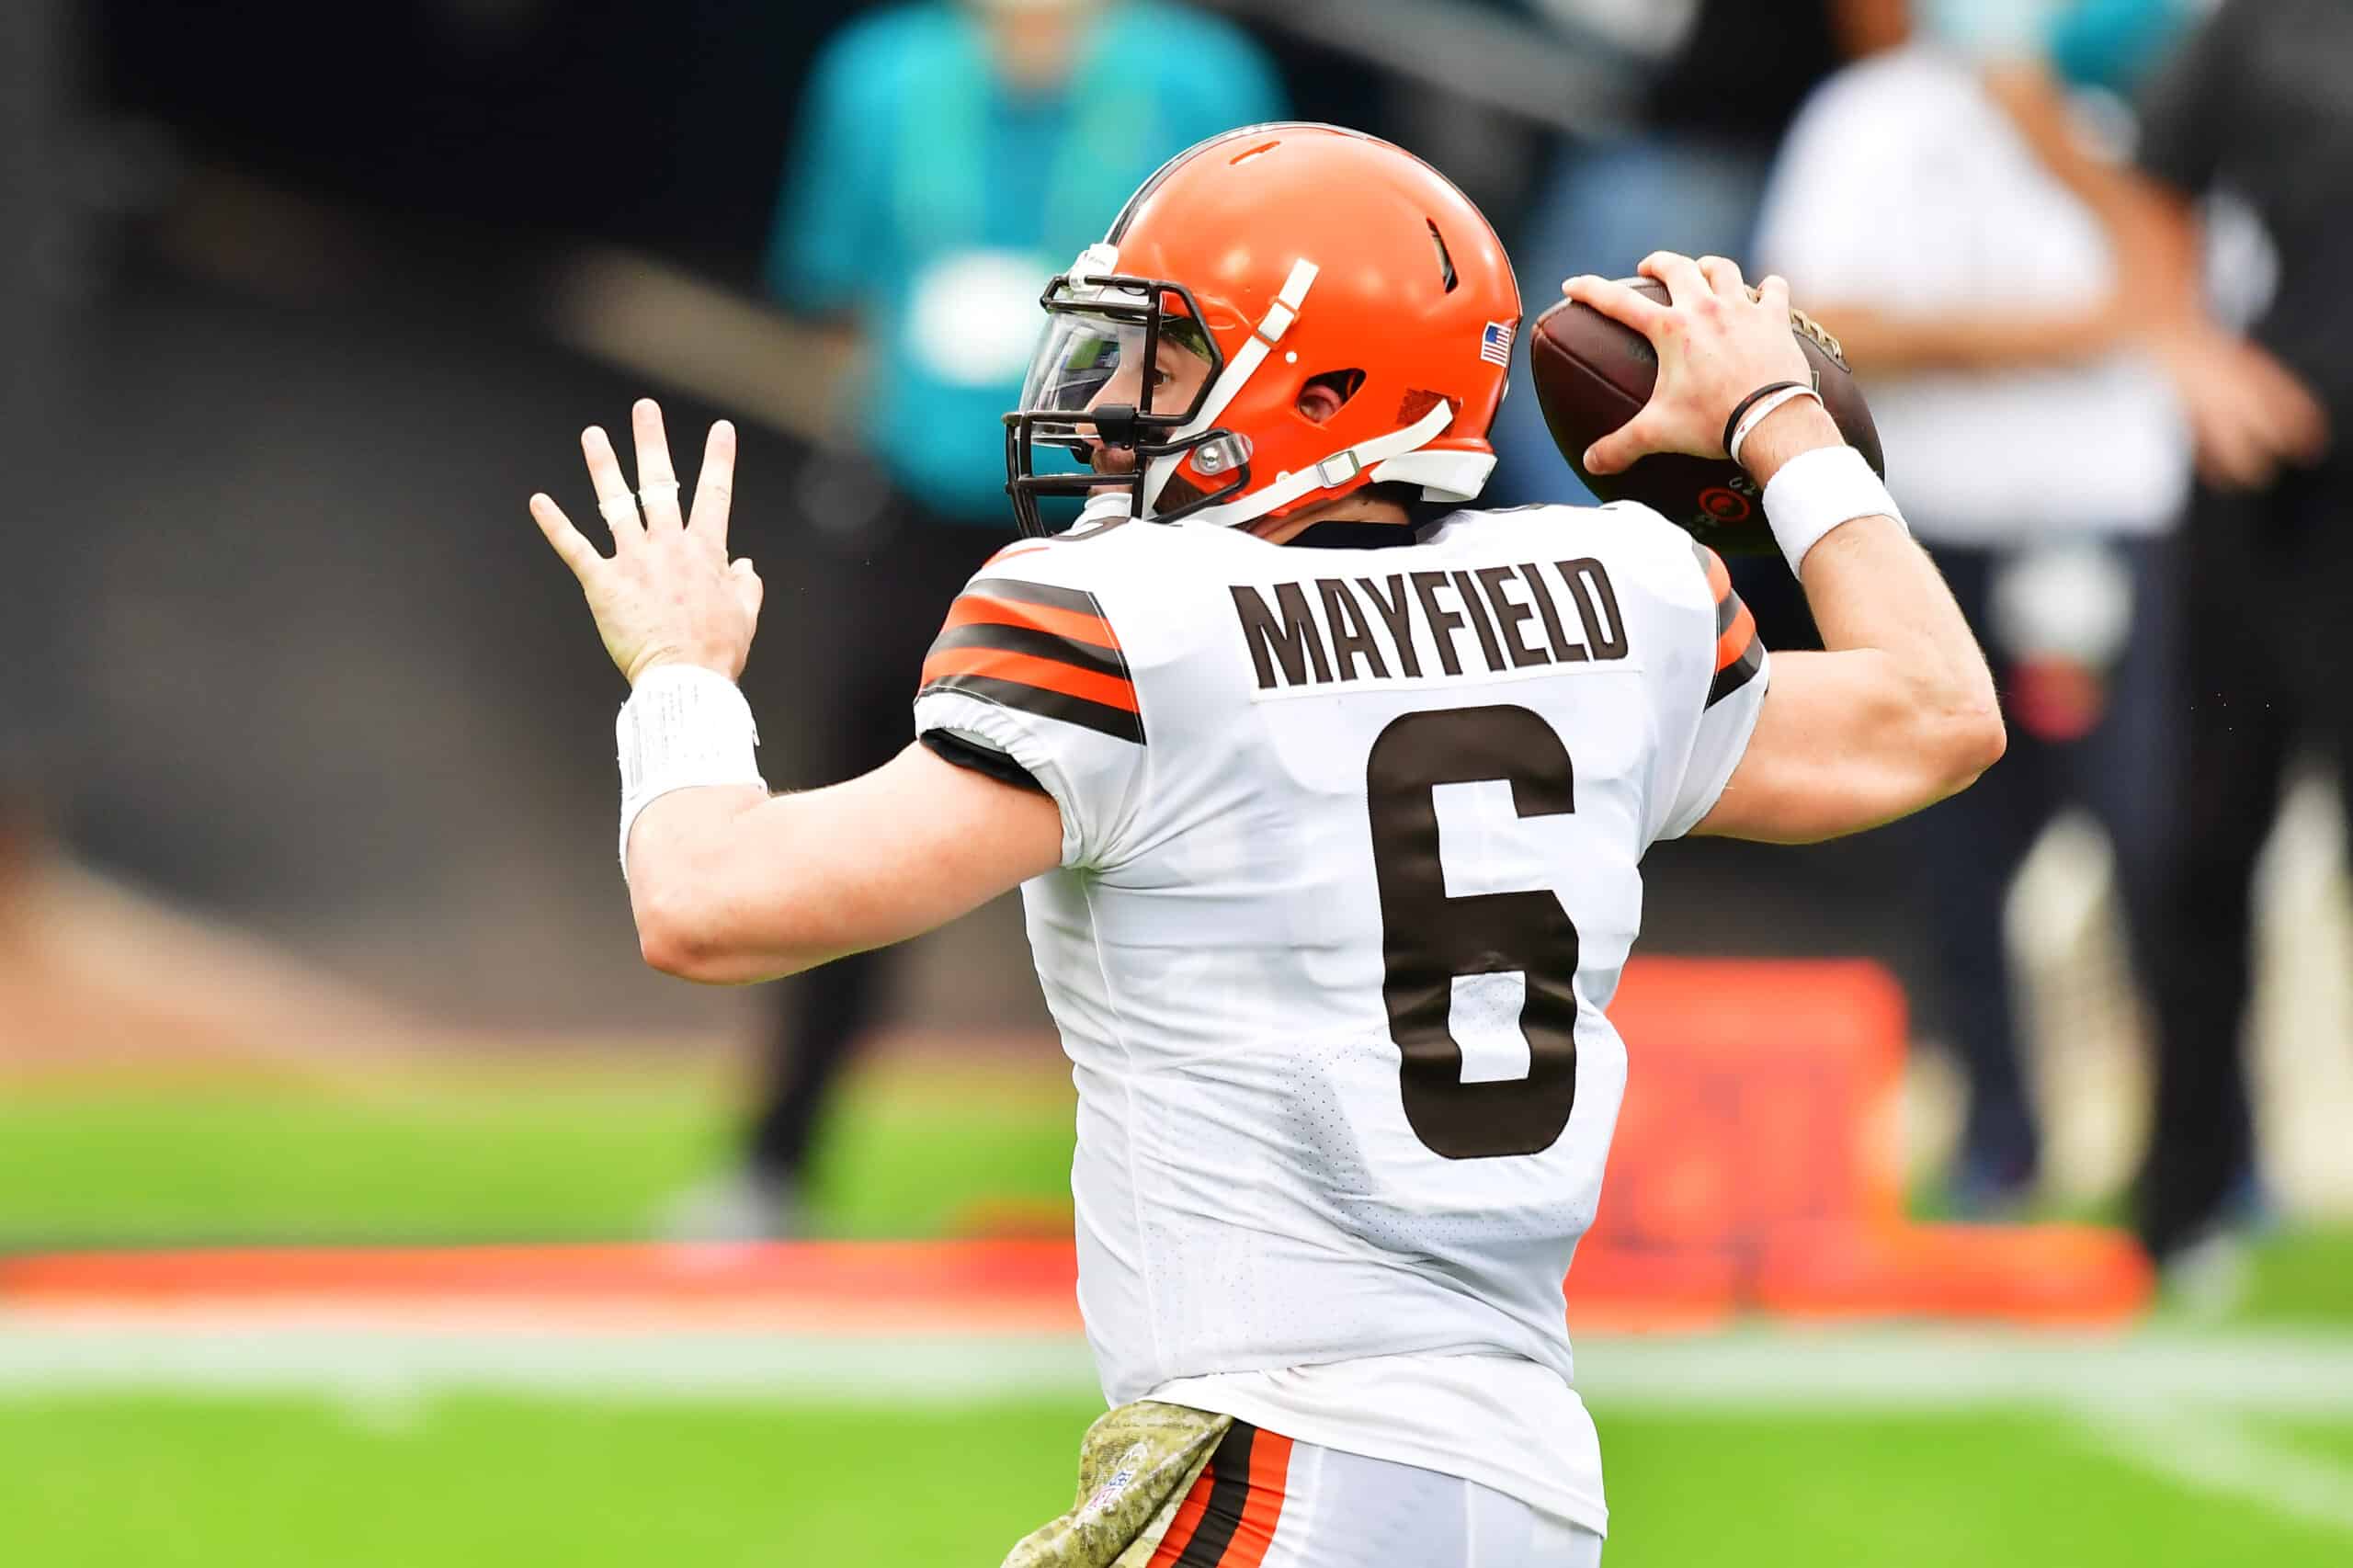 Baker Mayfield #6 of the Cleveland Browns looks to pass in the first half against the Jacksonville Jaguars at TIAA Bank Field on November 29, 2020 in Jacksonville, Florida.